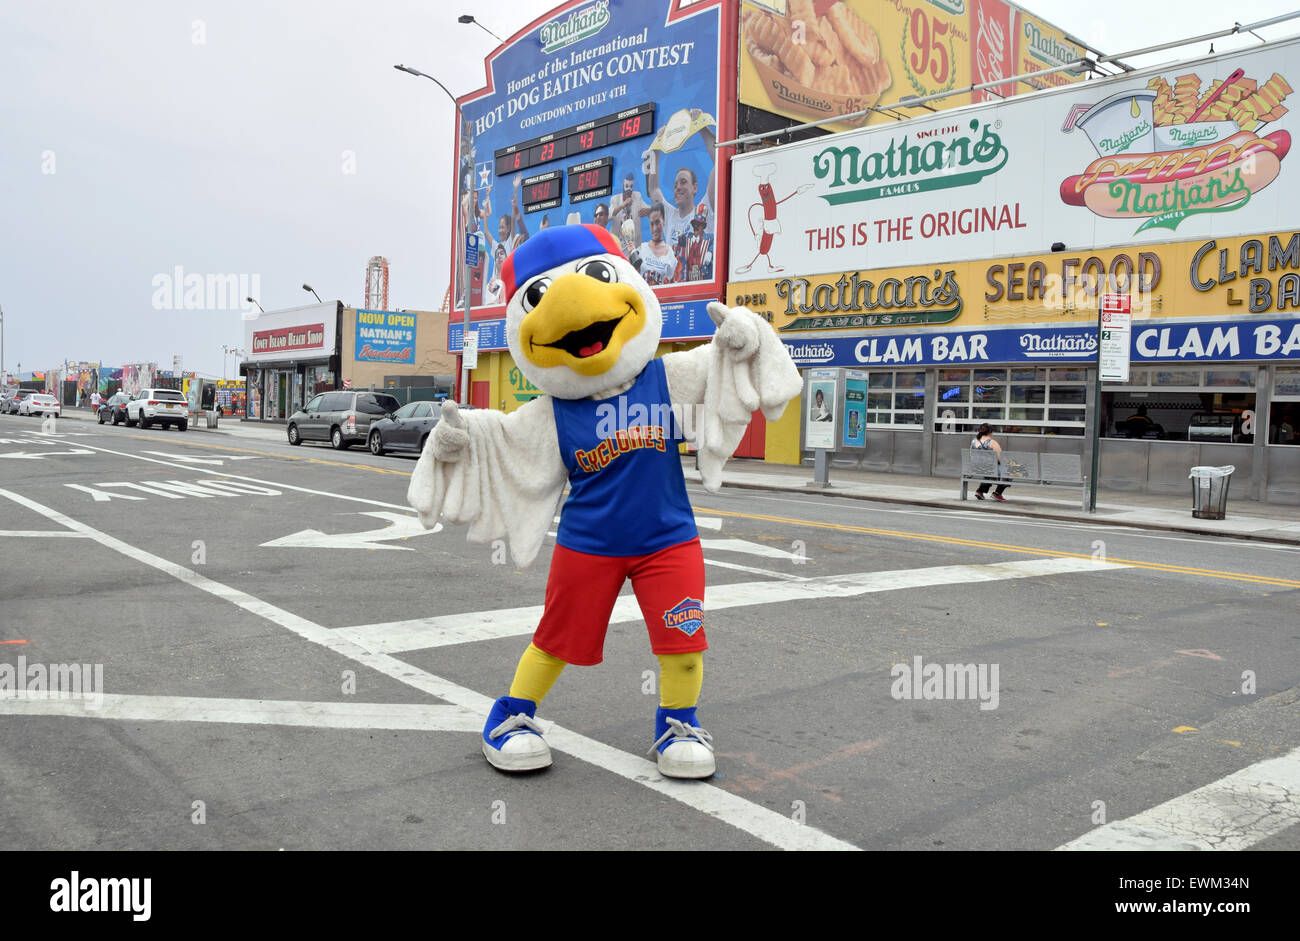 Pee-Wee the seagull, the Brooklyn Cyclones mascot photographed in